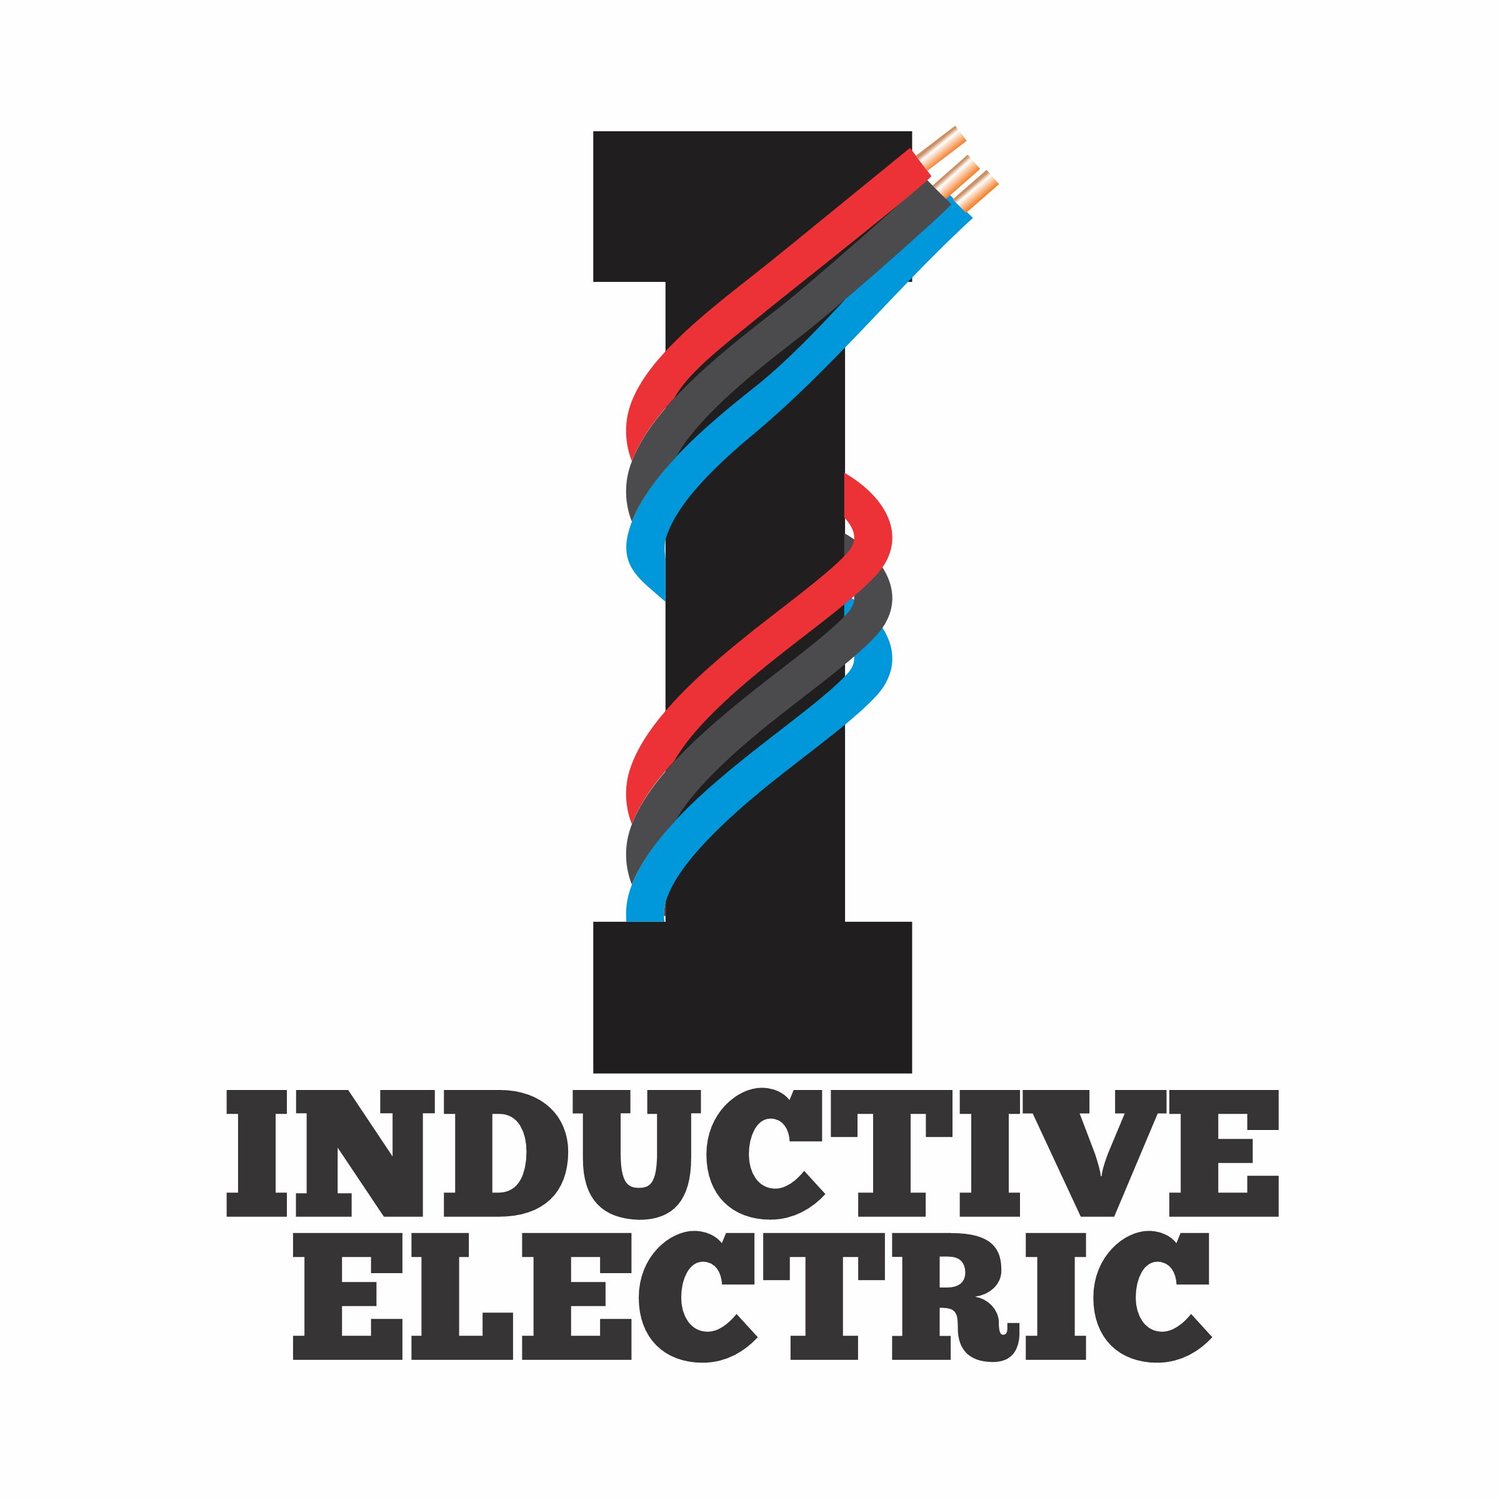 Inductive Electric